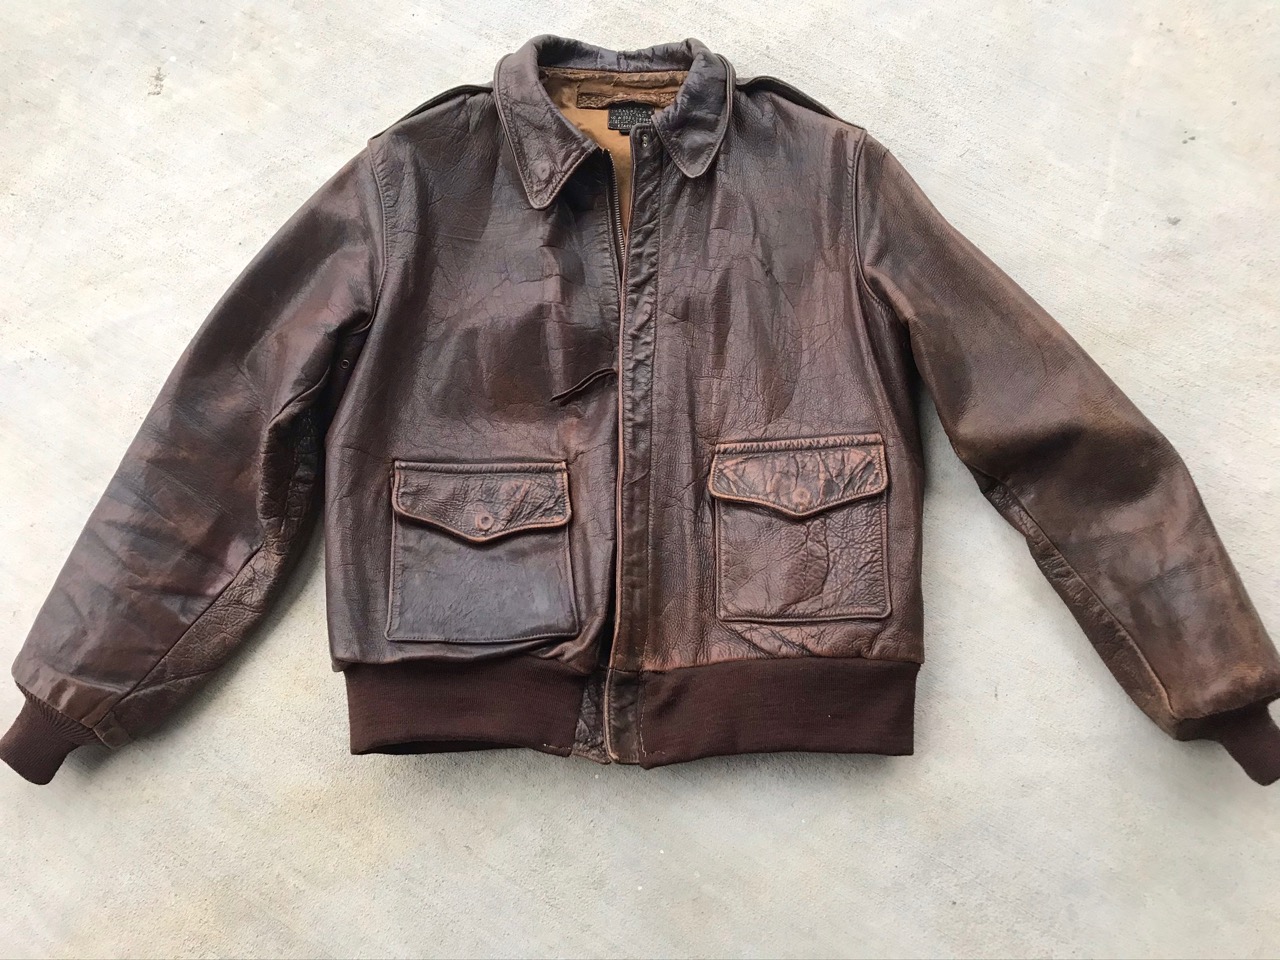 FOR SALE ORIGINAL A-2 JACKET SIZE 44 AERO CONTRACT 21996 | The Fedora ...